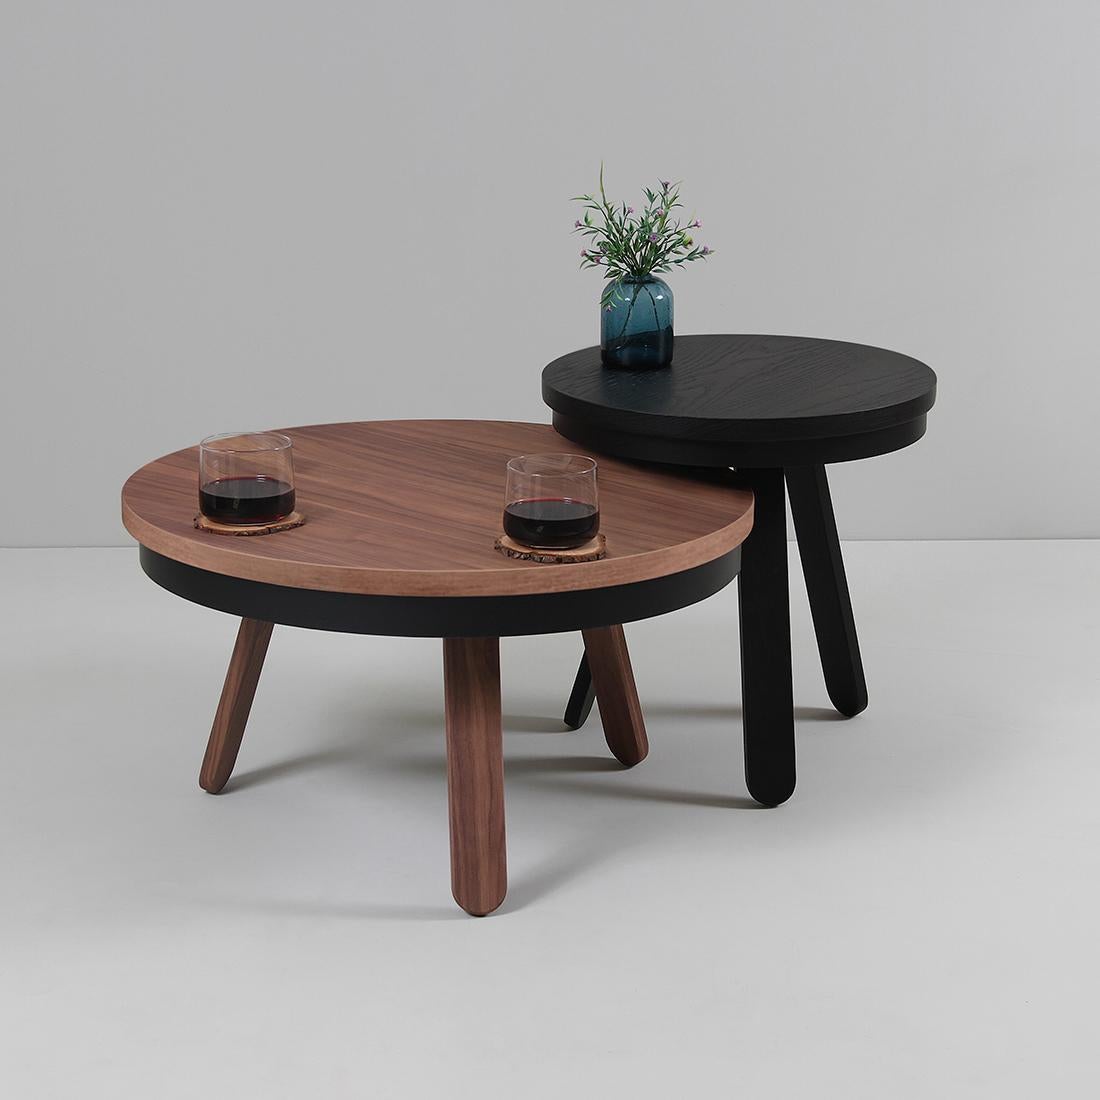 Batea M Coffee Table, Walnut & Black In New Condition For Sale In Madrid, Madrid